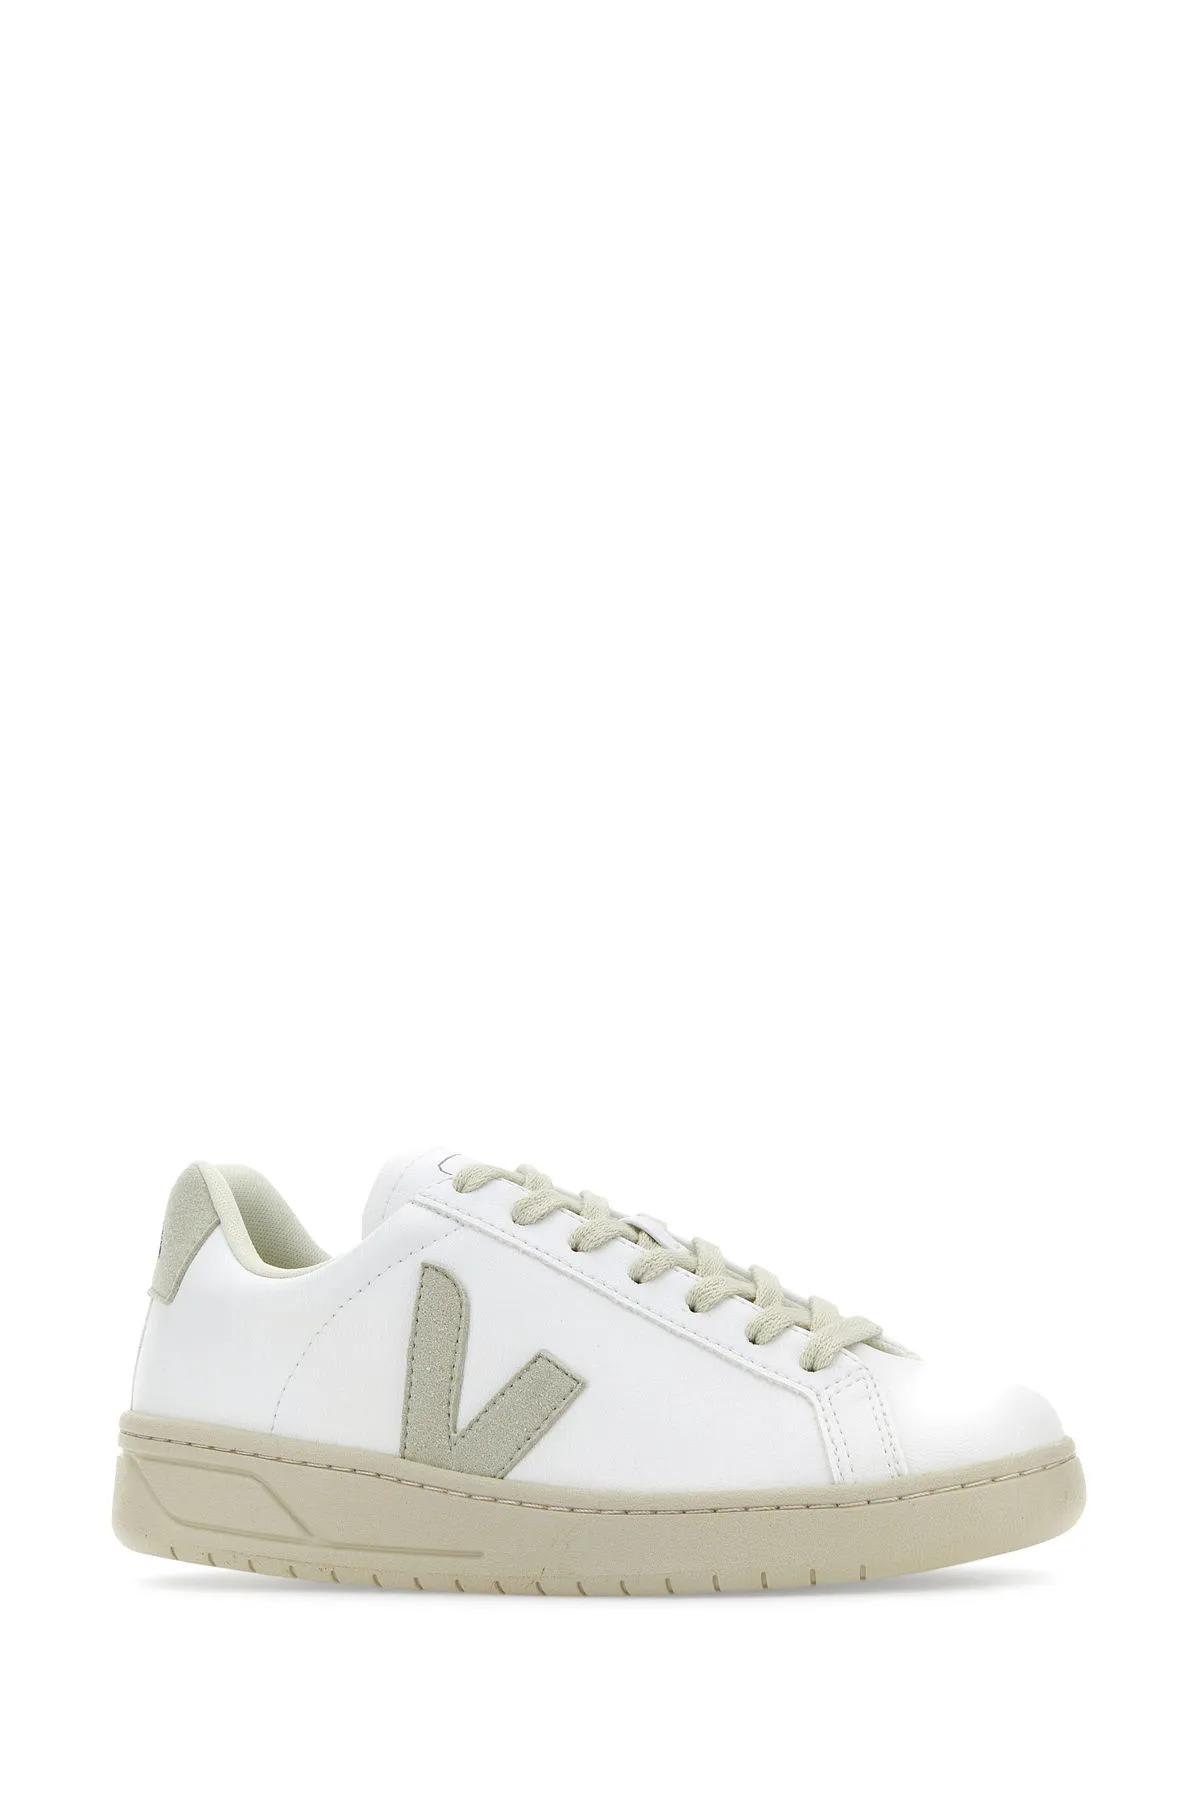 Shop Veja White Synthetic Leather Urca Sneakers In White_natural